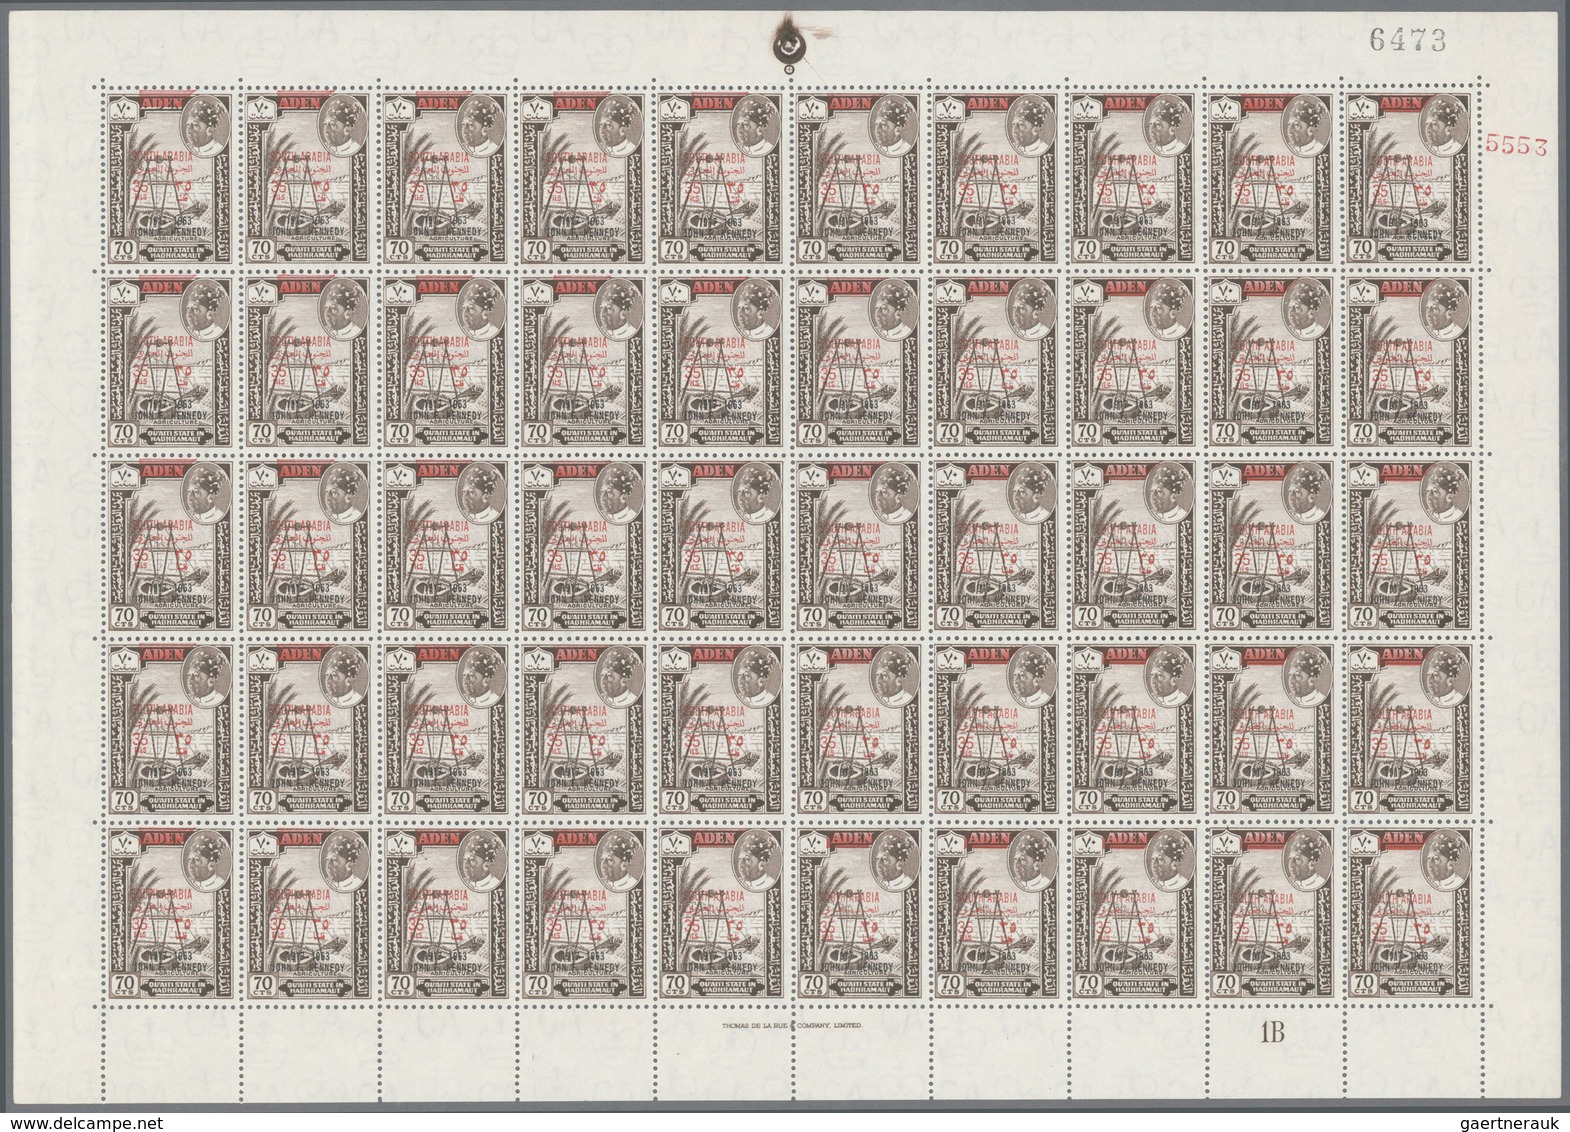 22027 Aden - Qu'aiti State In Hadhramaut: 1966, Definitives With Red Bilingual Opt. 'SOUTH ARABIA' And Add - Yemen